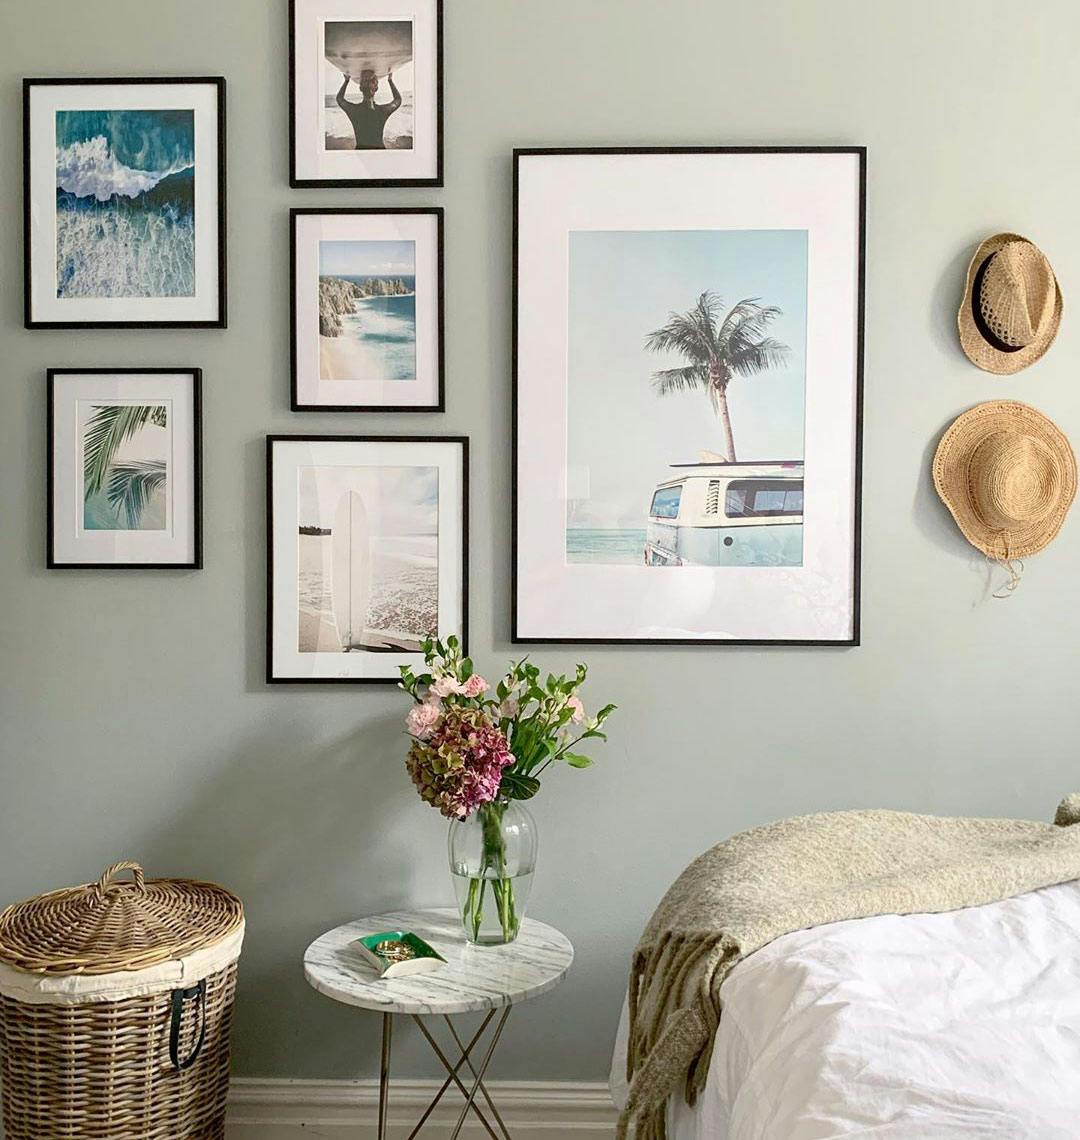 Gallery wall with beach prints in walnut frames